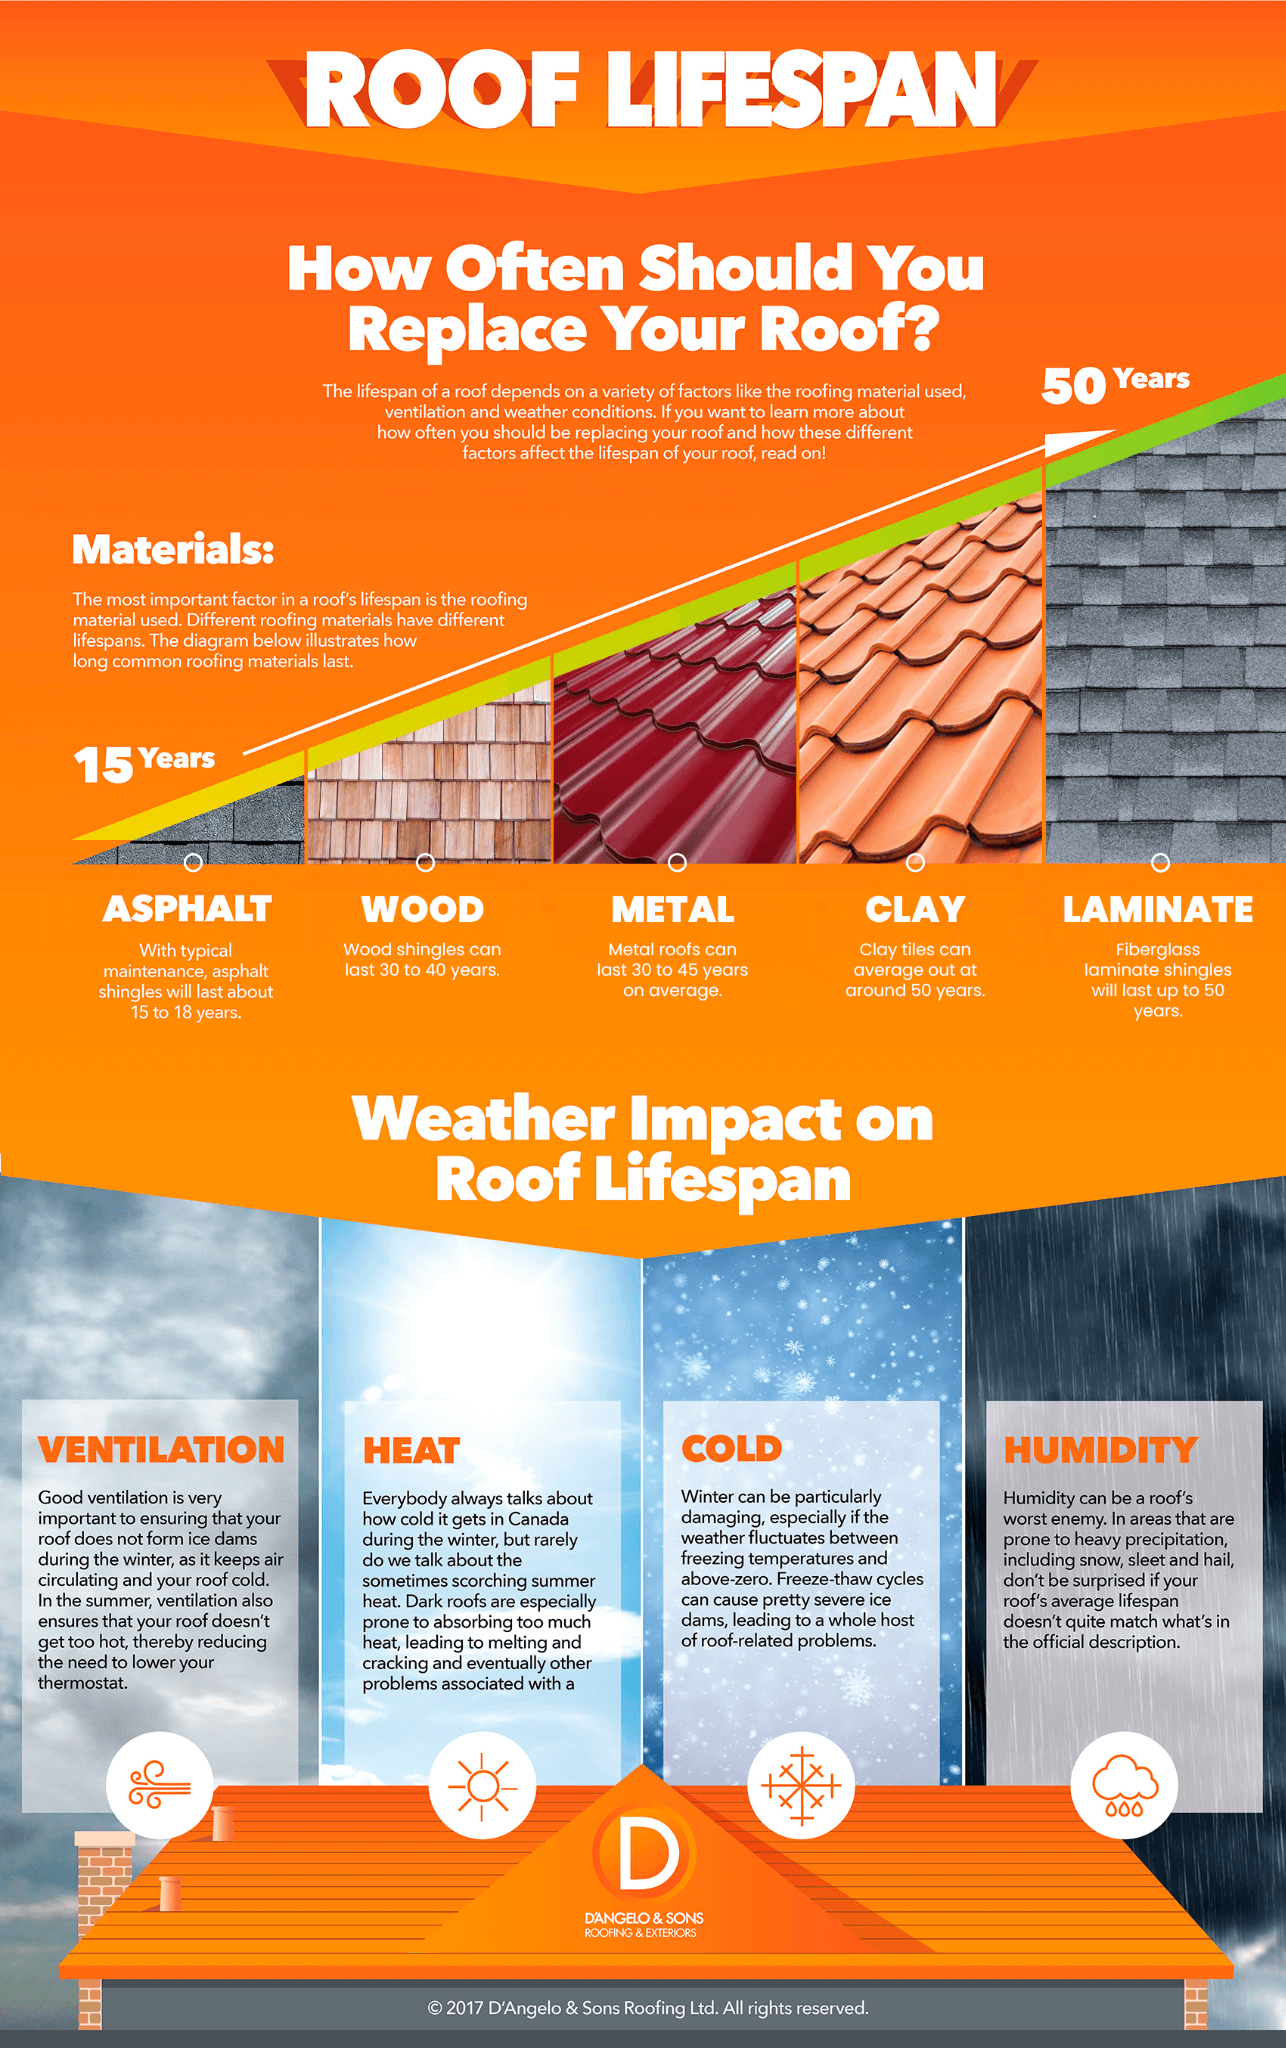 Roof lifespan How-often-should-i-replace-roof-infographic